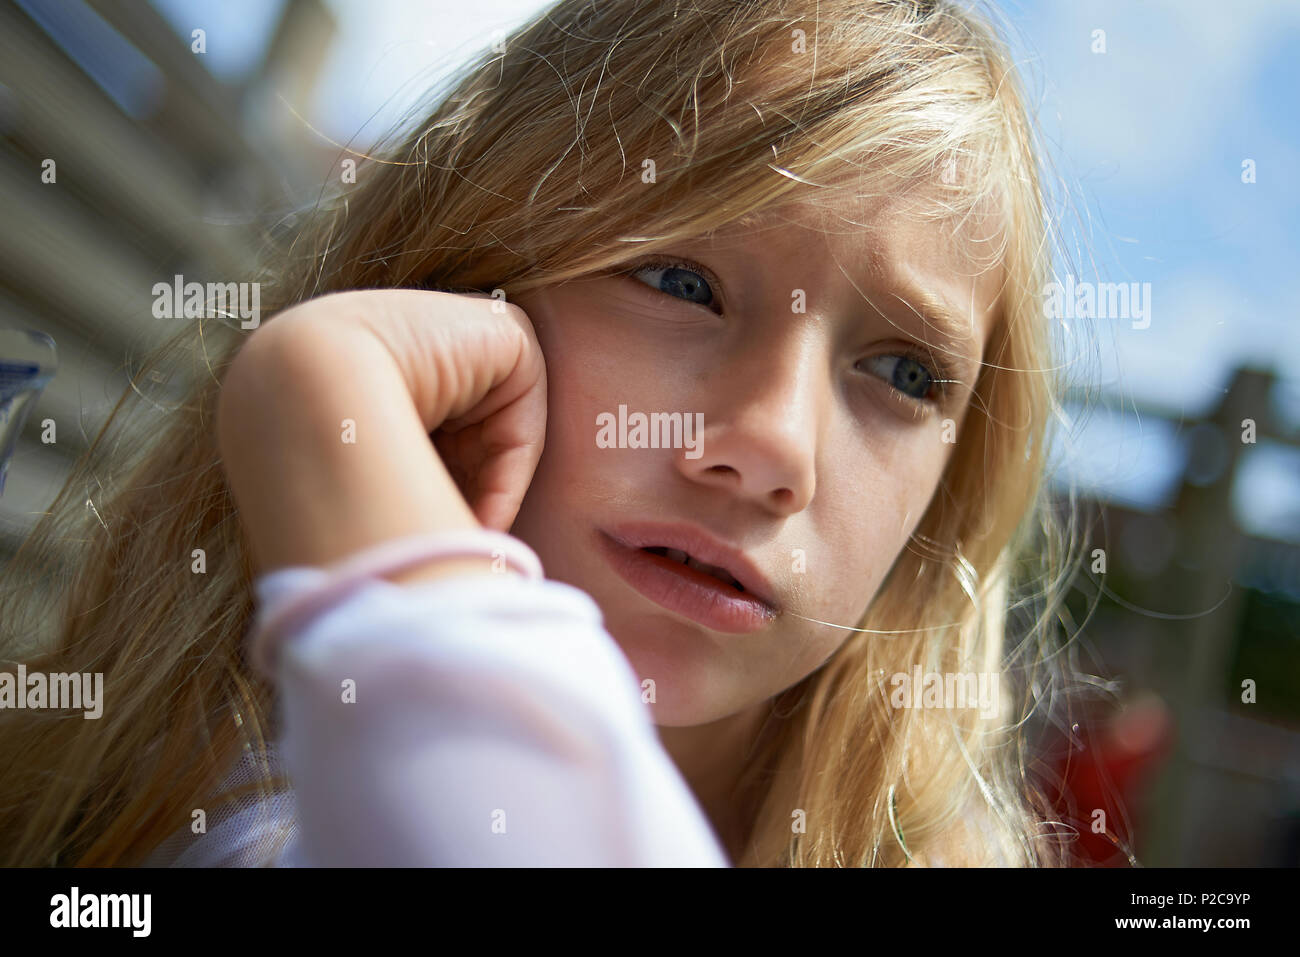 Portrait fo a young preteen blonde girl sitting outside with her head in her hands looking upset and sulky Stock Photo